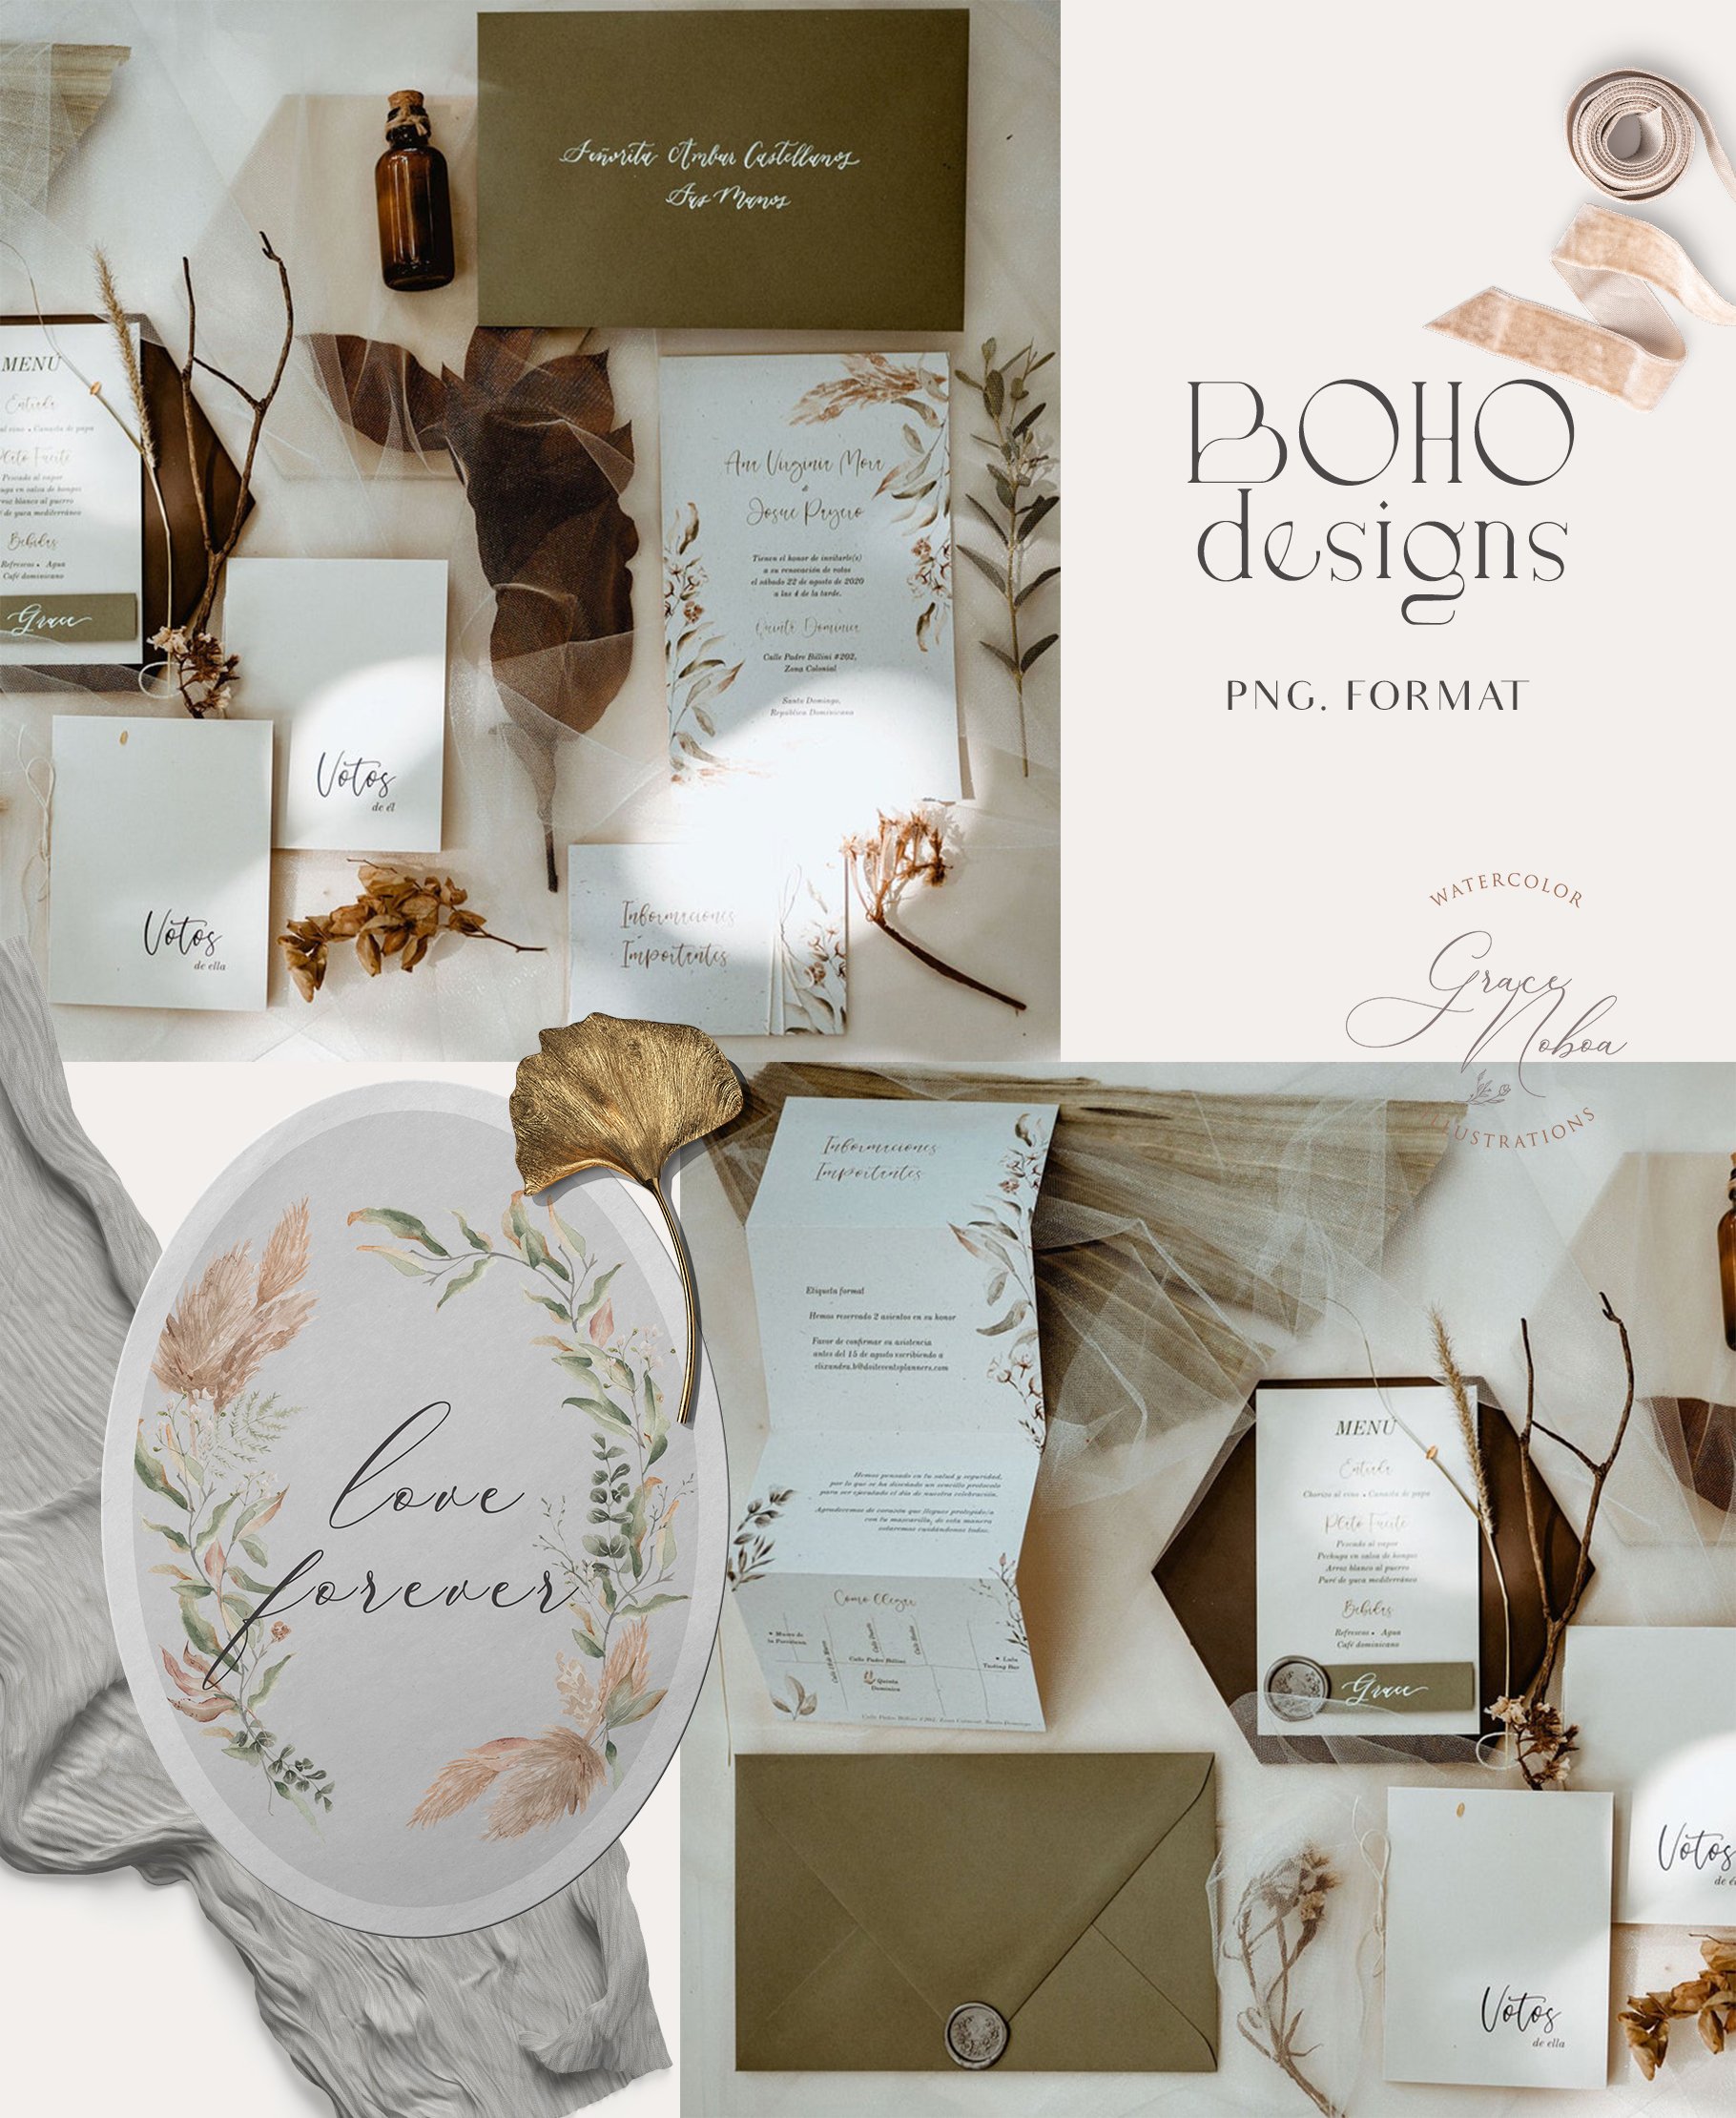 Collage of wedding stationery and stationery items.